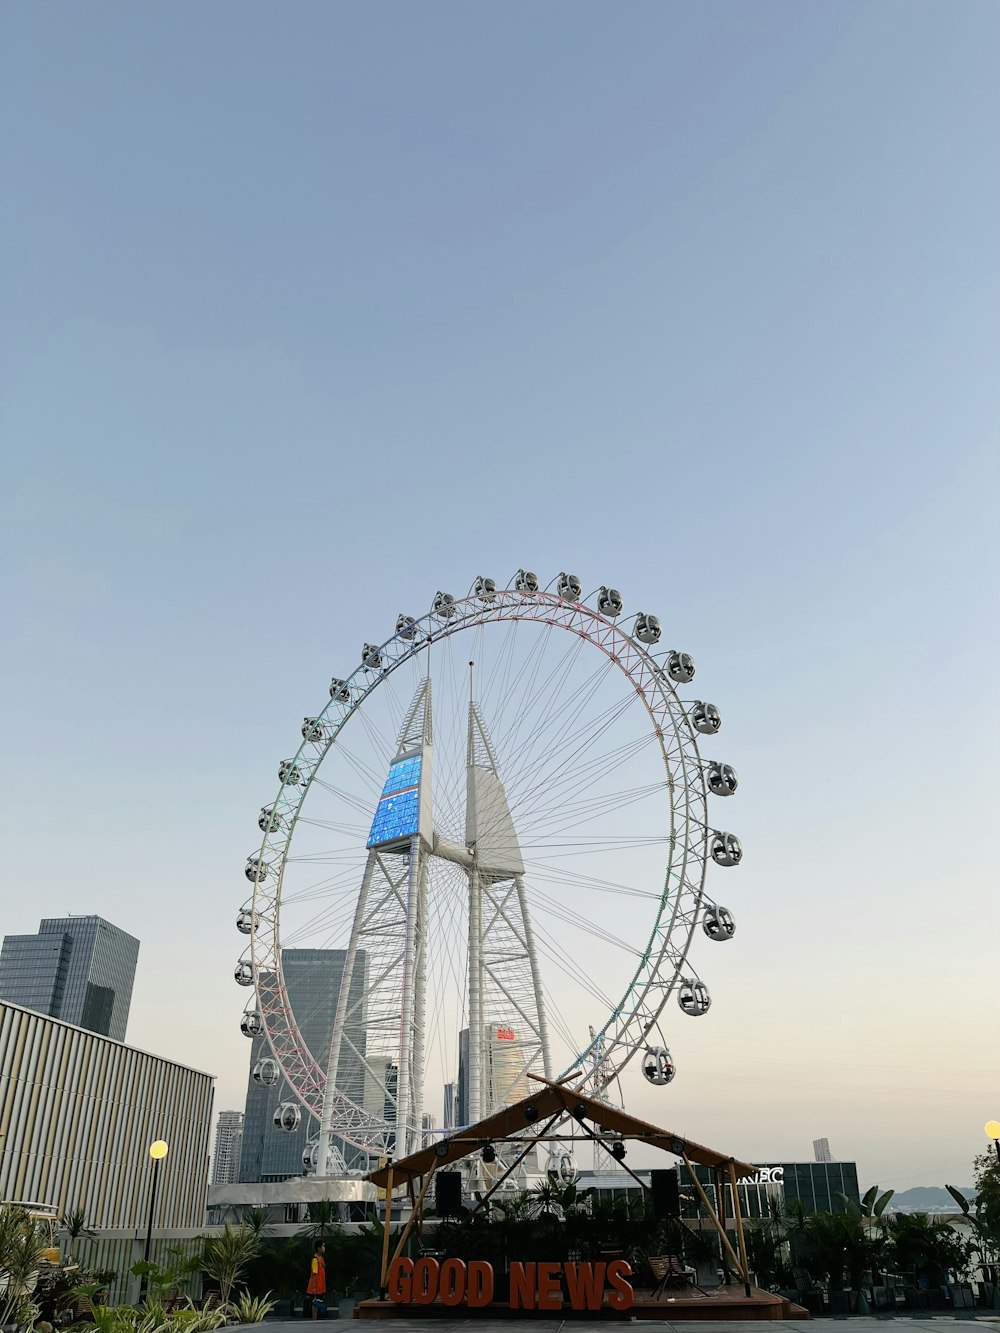 a large ferris wheel sitting in the middle of a city